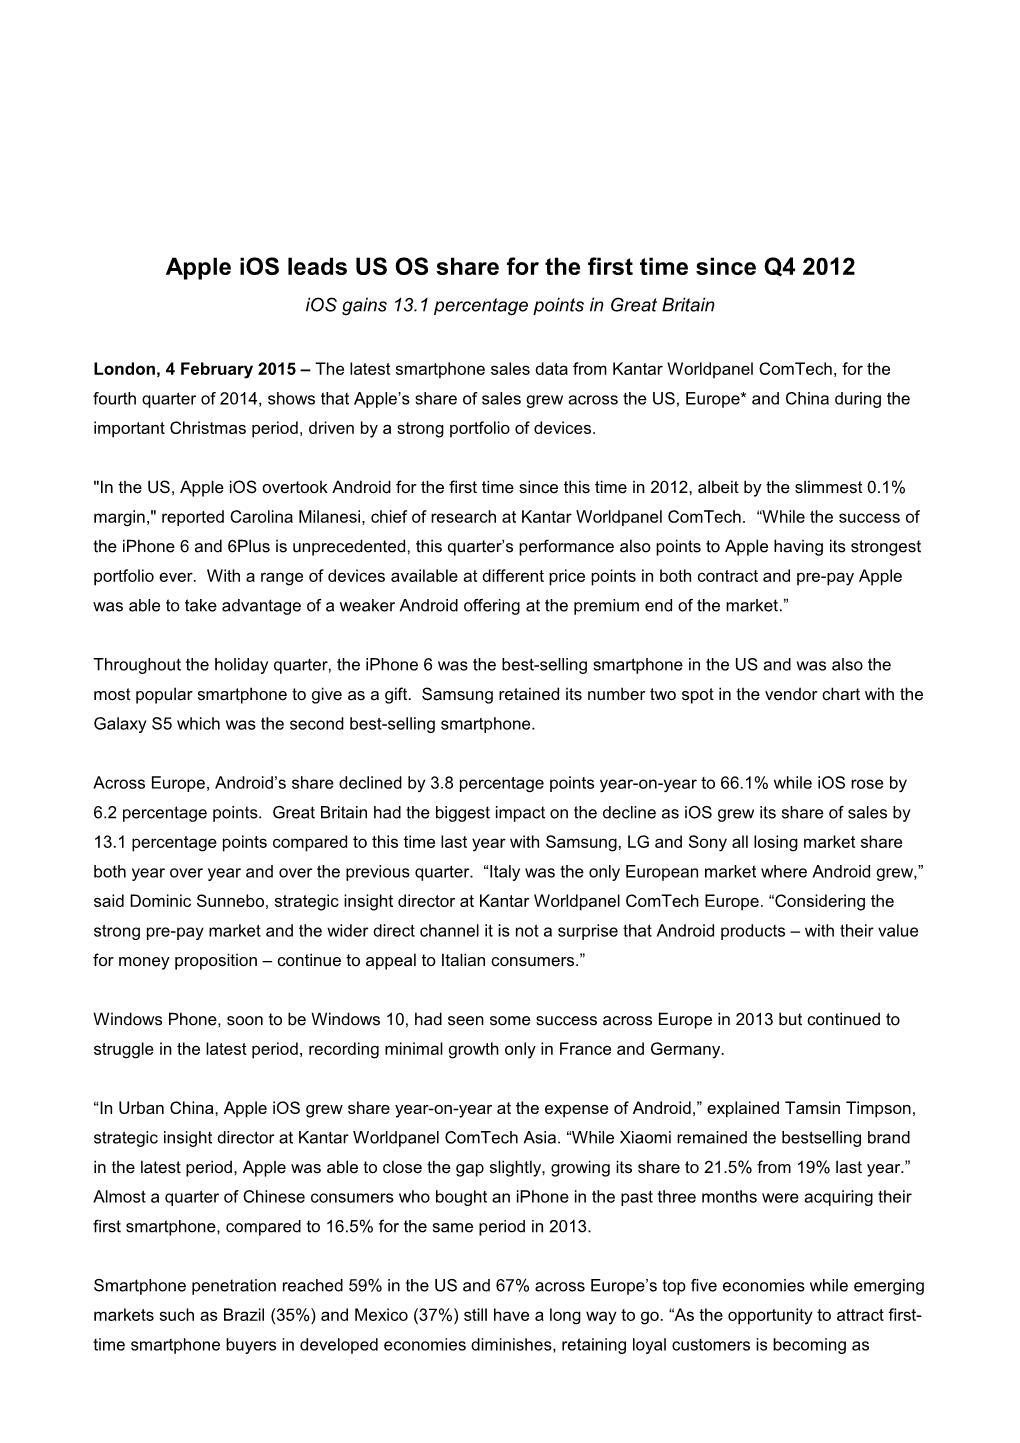 Apple Ios Leads US OS Share for the First Time Since Q4 2012